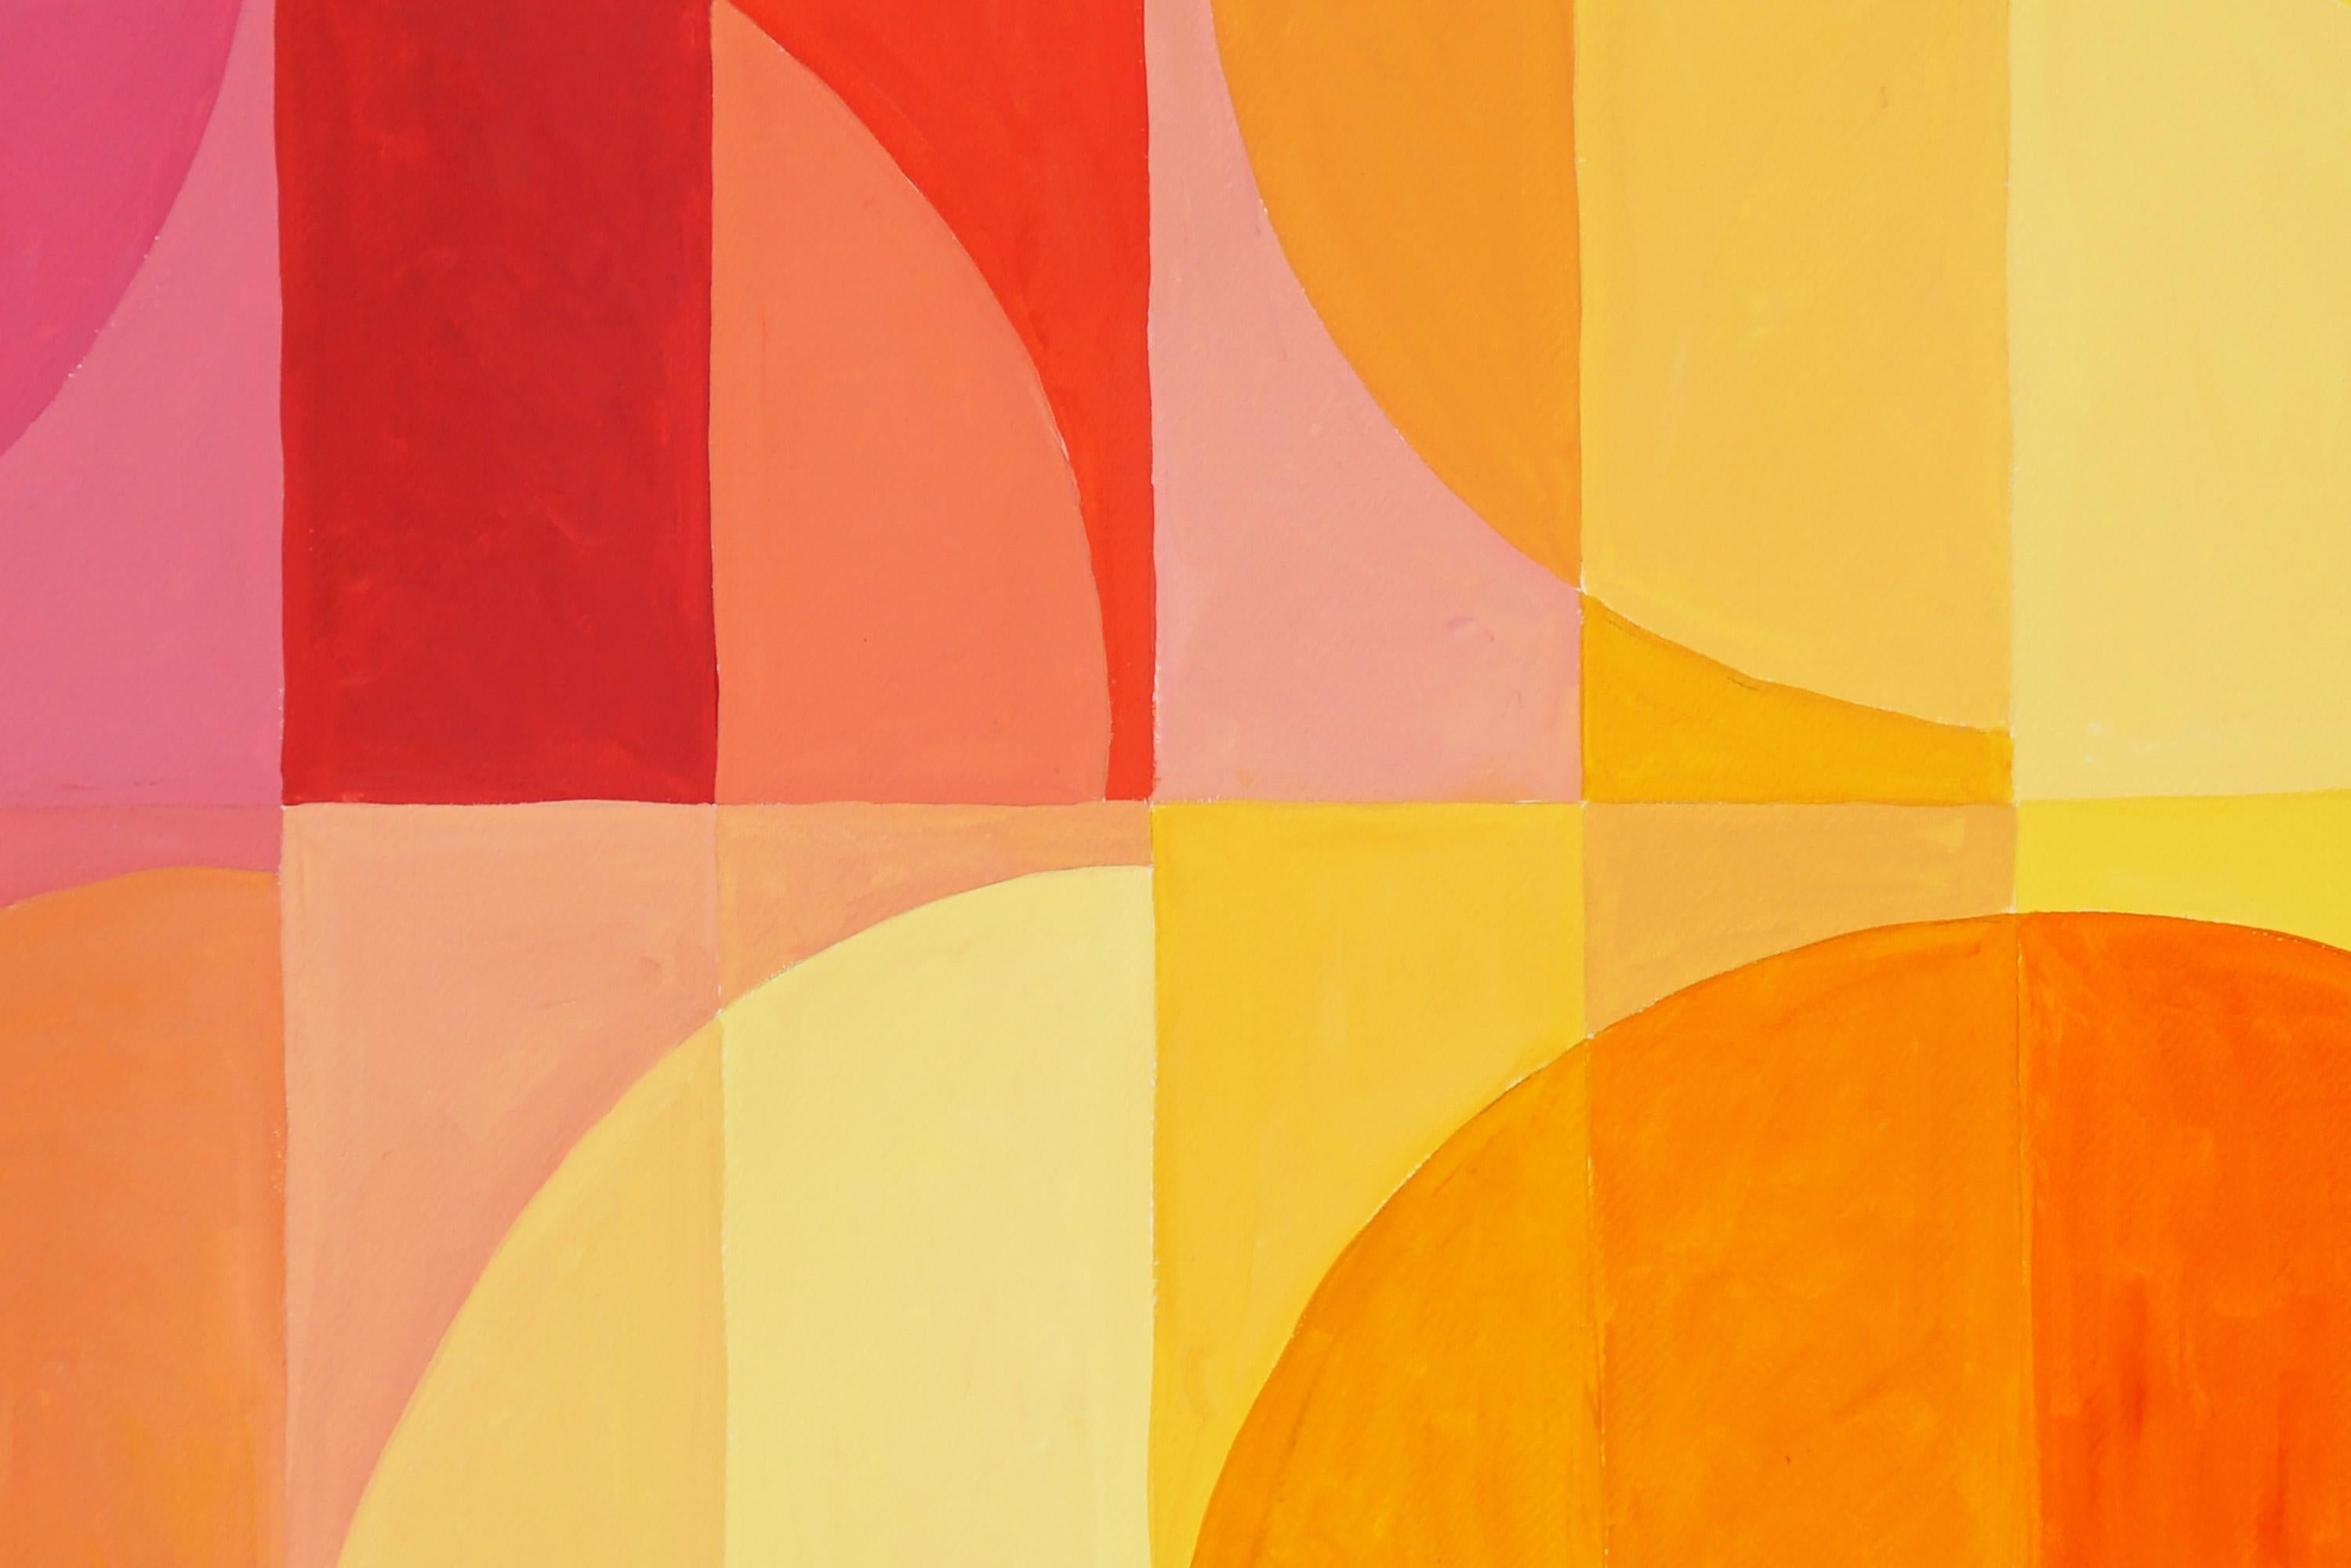 Southern Hemisphere Sunset, Squared Bauhaus, Pink Yellow Gradient, Fucsia Grid - Abstract Geometric Painting by Natalia Roman